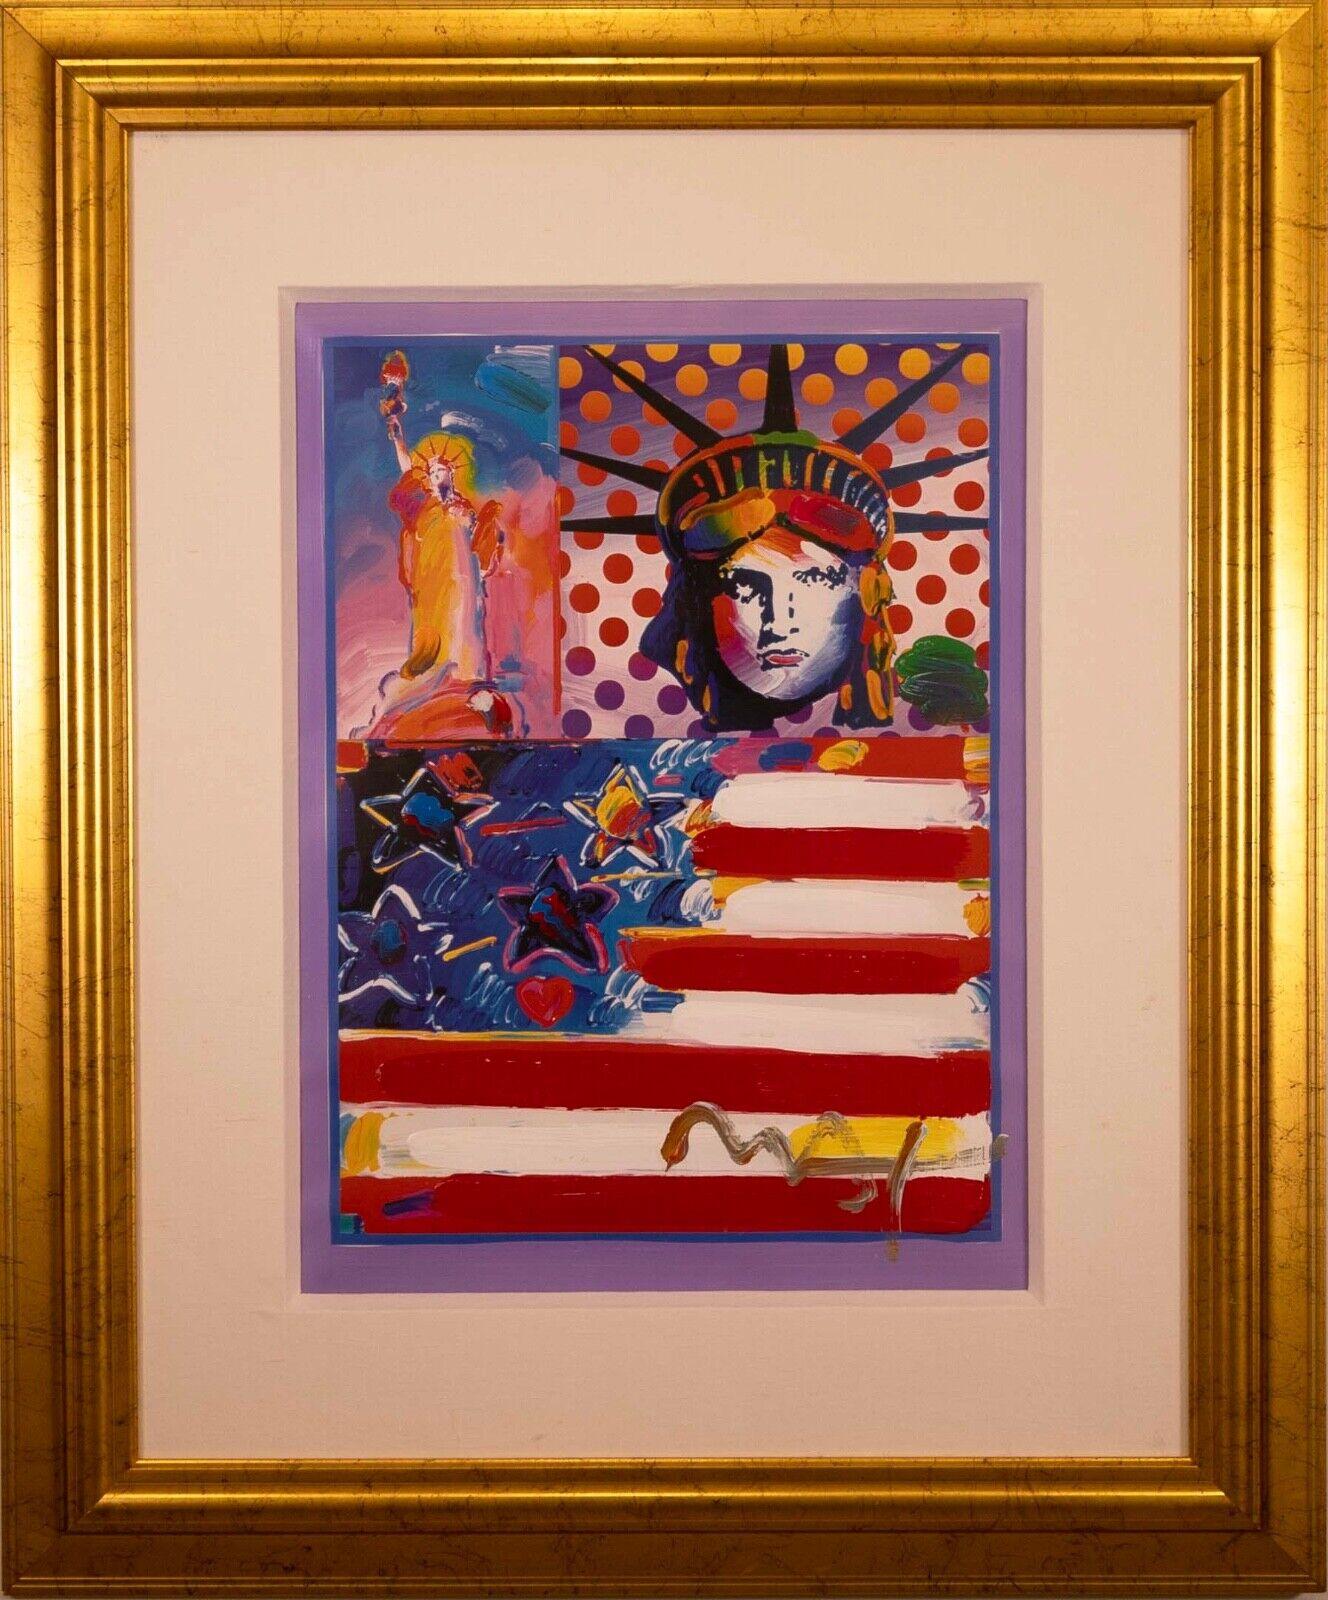 A classic patriotic mixed-media lithography with acrylic painting on paper titled “God Bless America II” by famed artist Peter Max. Hand signed in acrylic by artist bottom right. Created in 2001. Lady Liberty’s portrait makes an appearance alongside